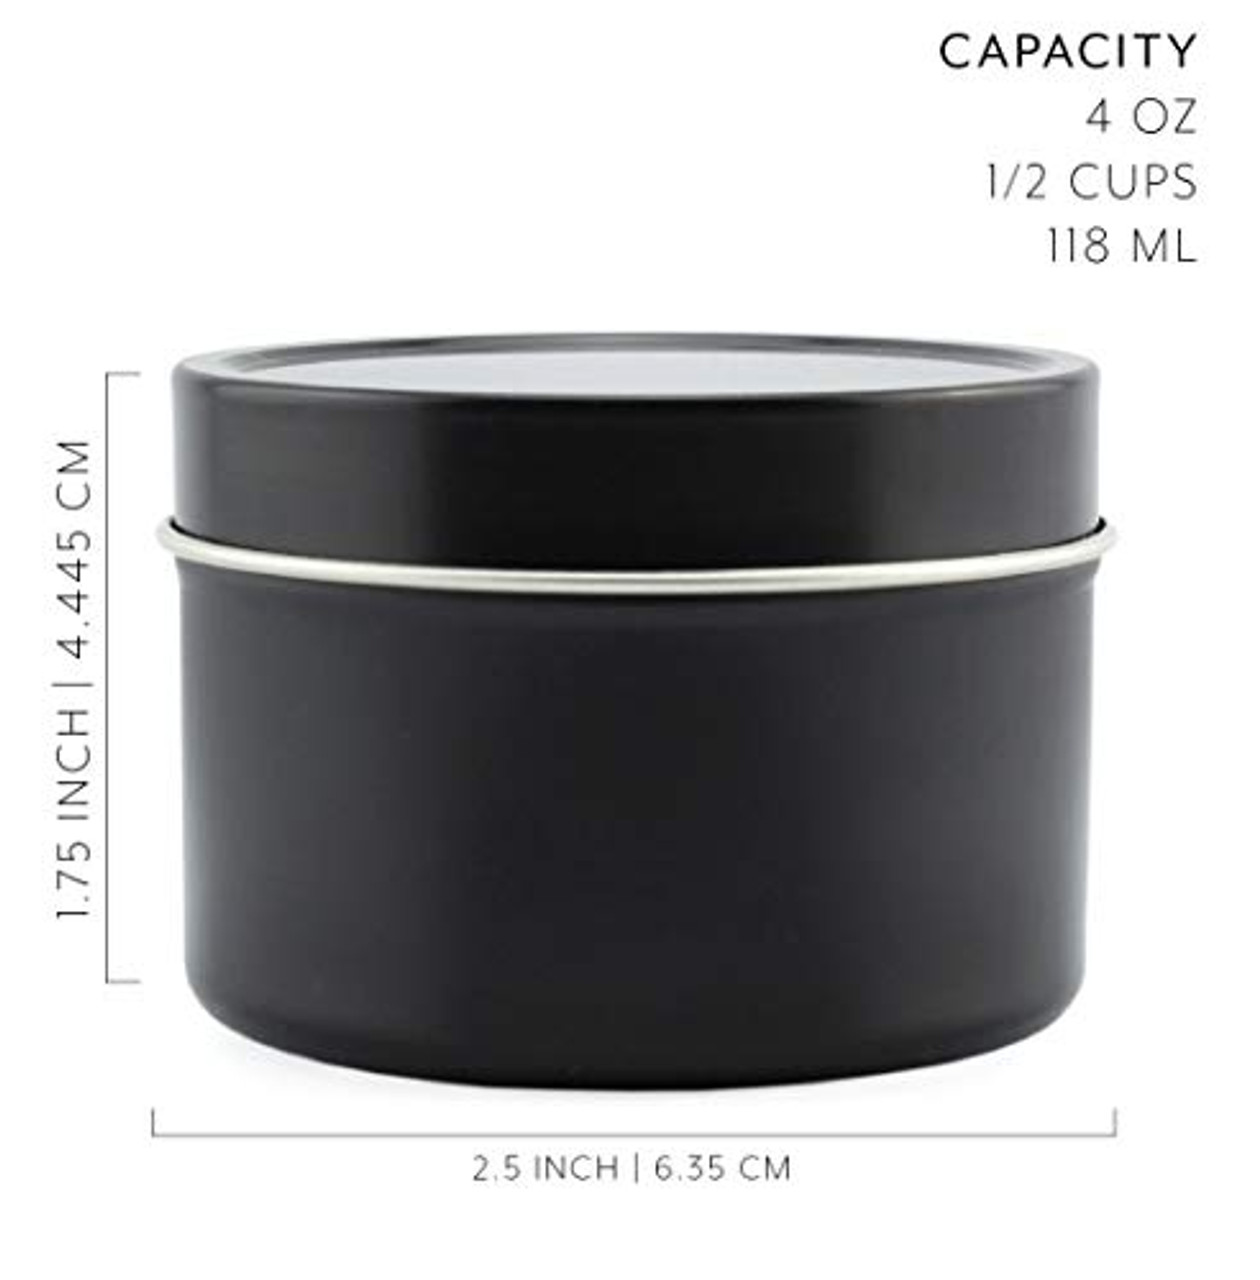 ZOENHOU 60 Pack 4 Oz Candle Tins, Round Empty Metal Tins with Lids,  Portable Metal Storage Candle Containers, CandleJars for Making Candles,  Black